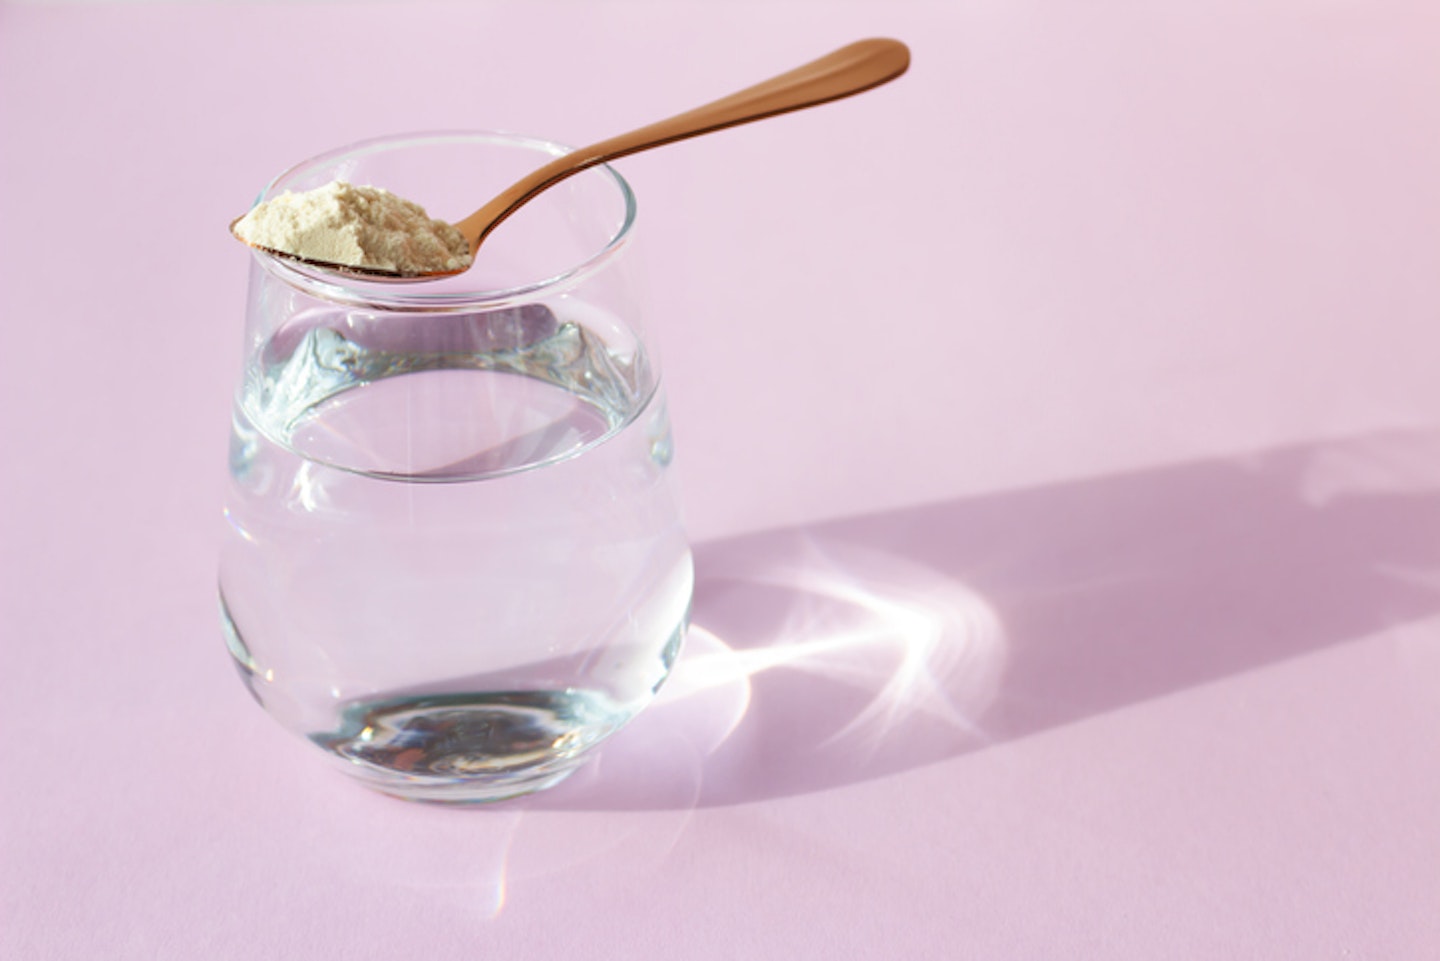 Collagen powder in a spoon and a glass of water on a pink background. Beauty concept. Place for your text